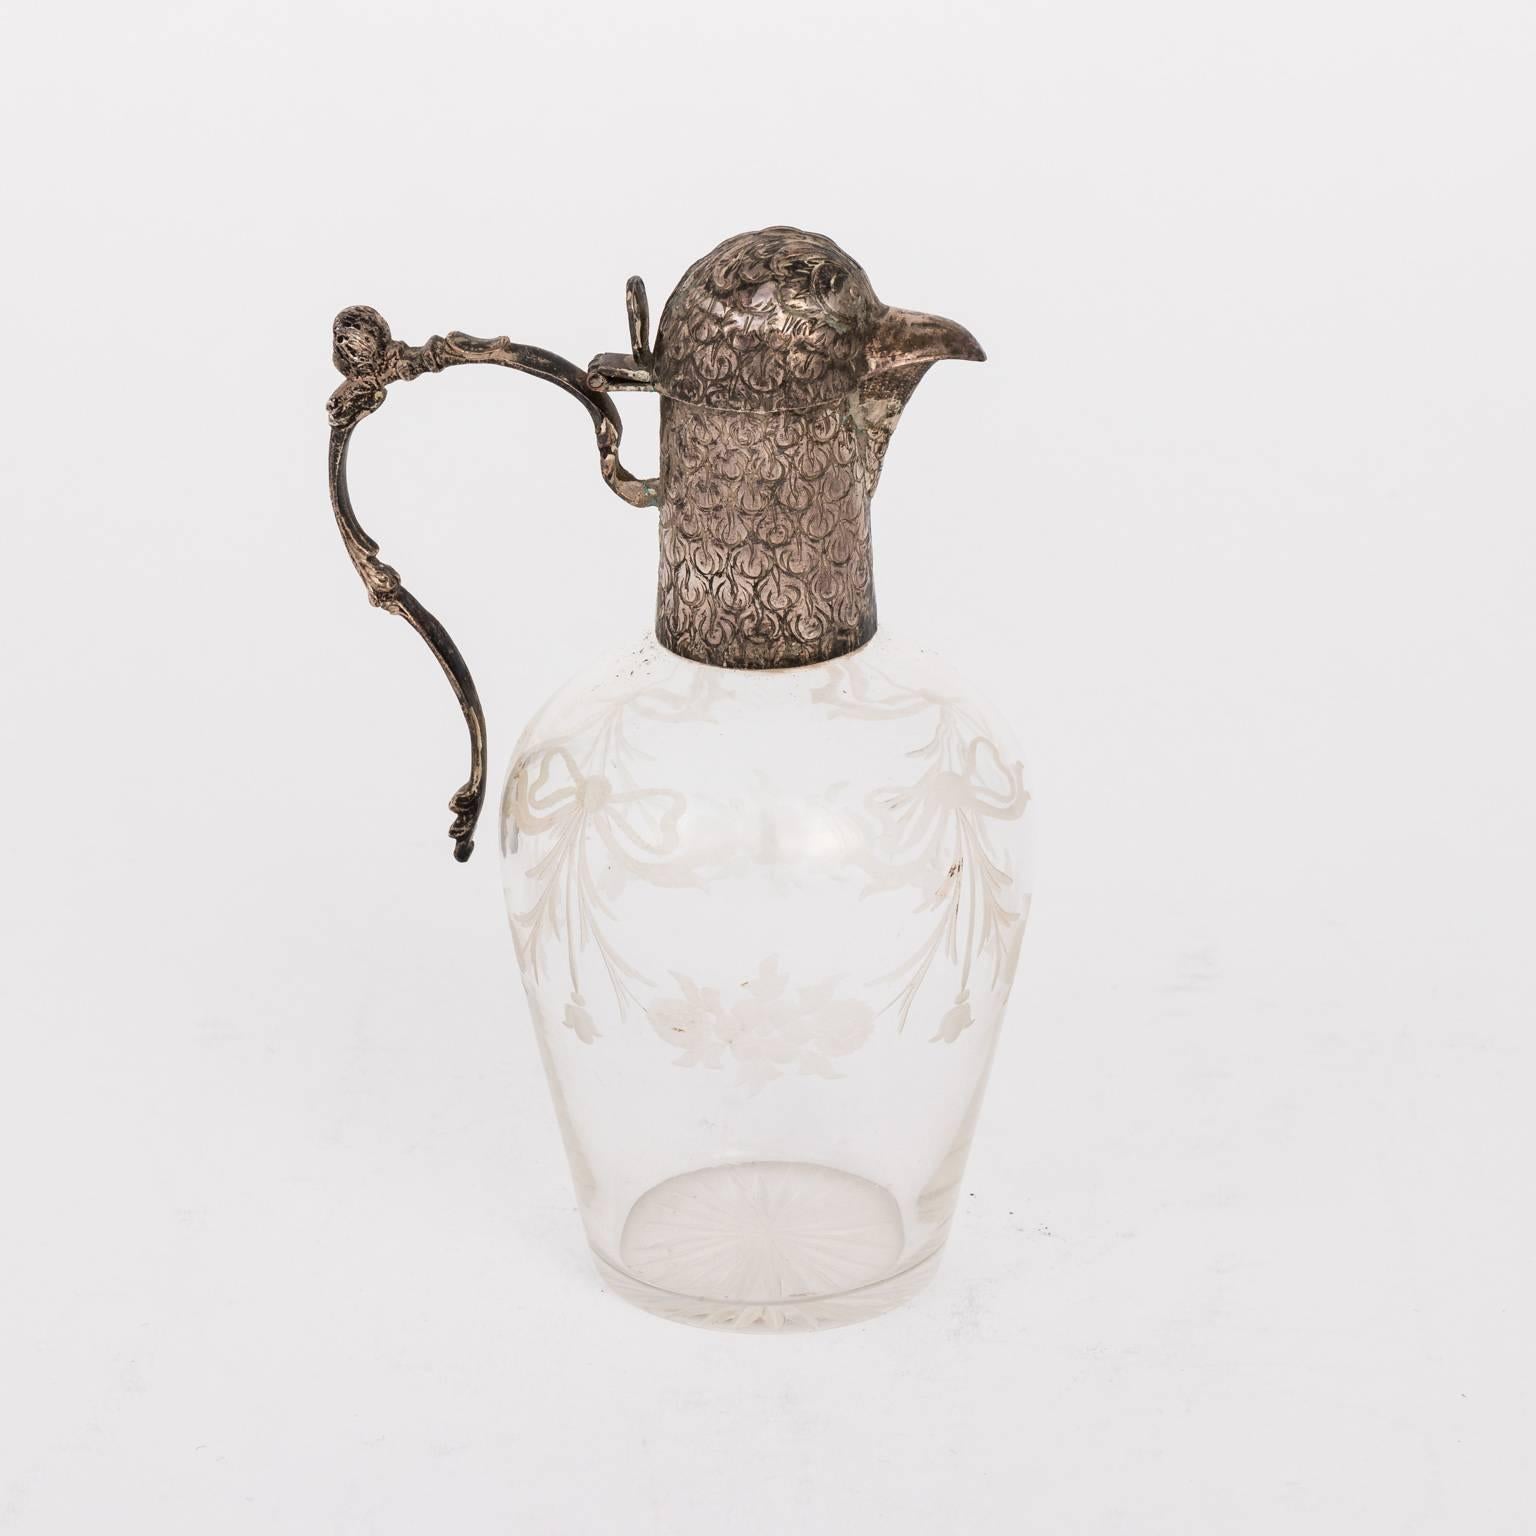 Decanter from the Netherlands with etched glass and 930 pure sterling silver in the shape of a bird's head and beak with a decorated handle, circa early 20th century.
 